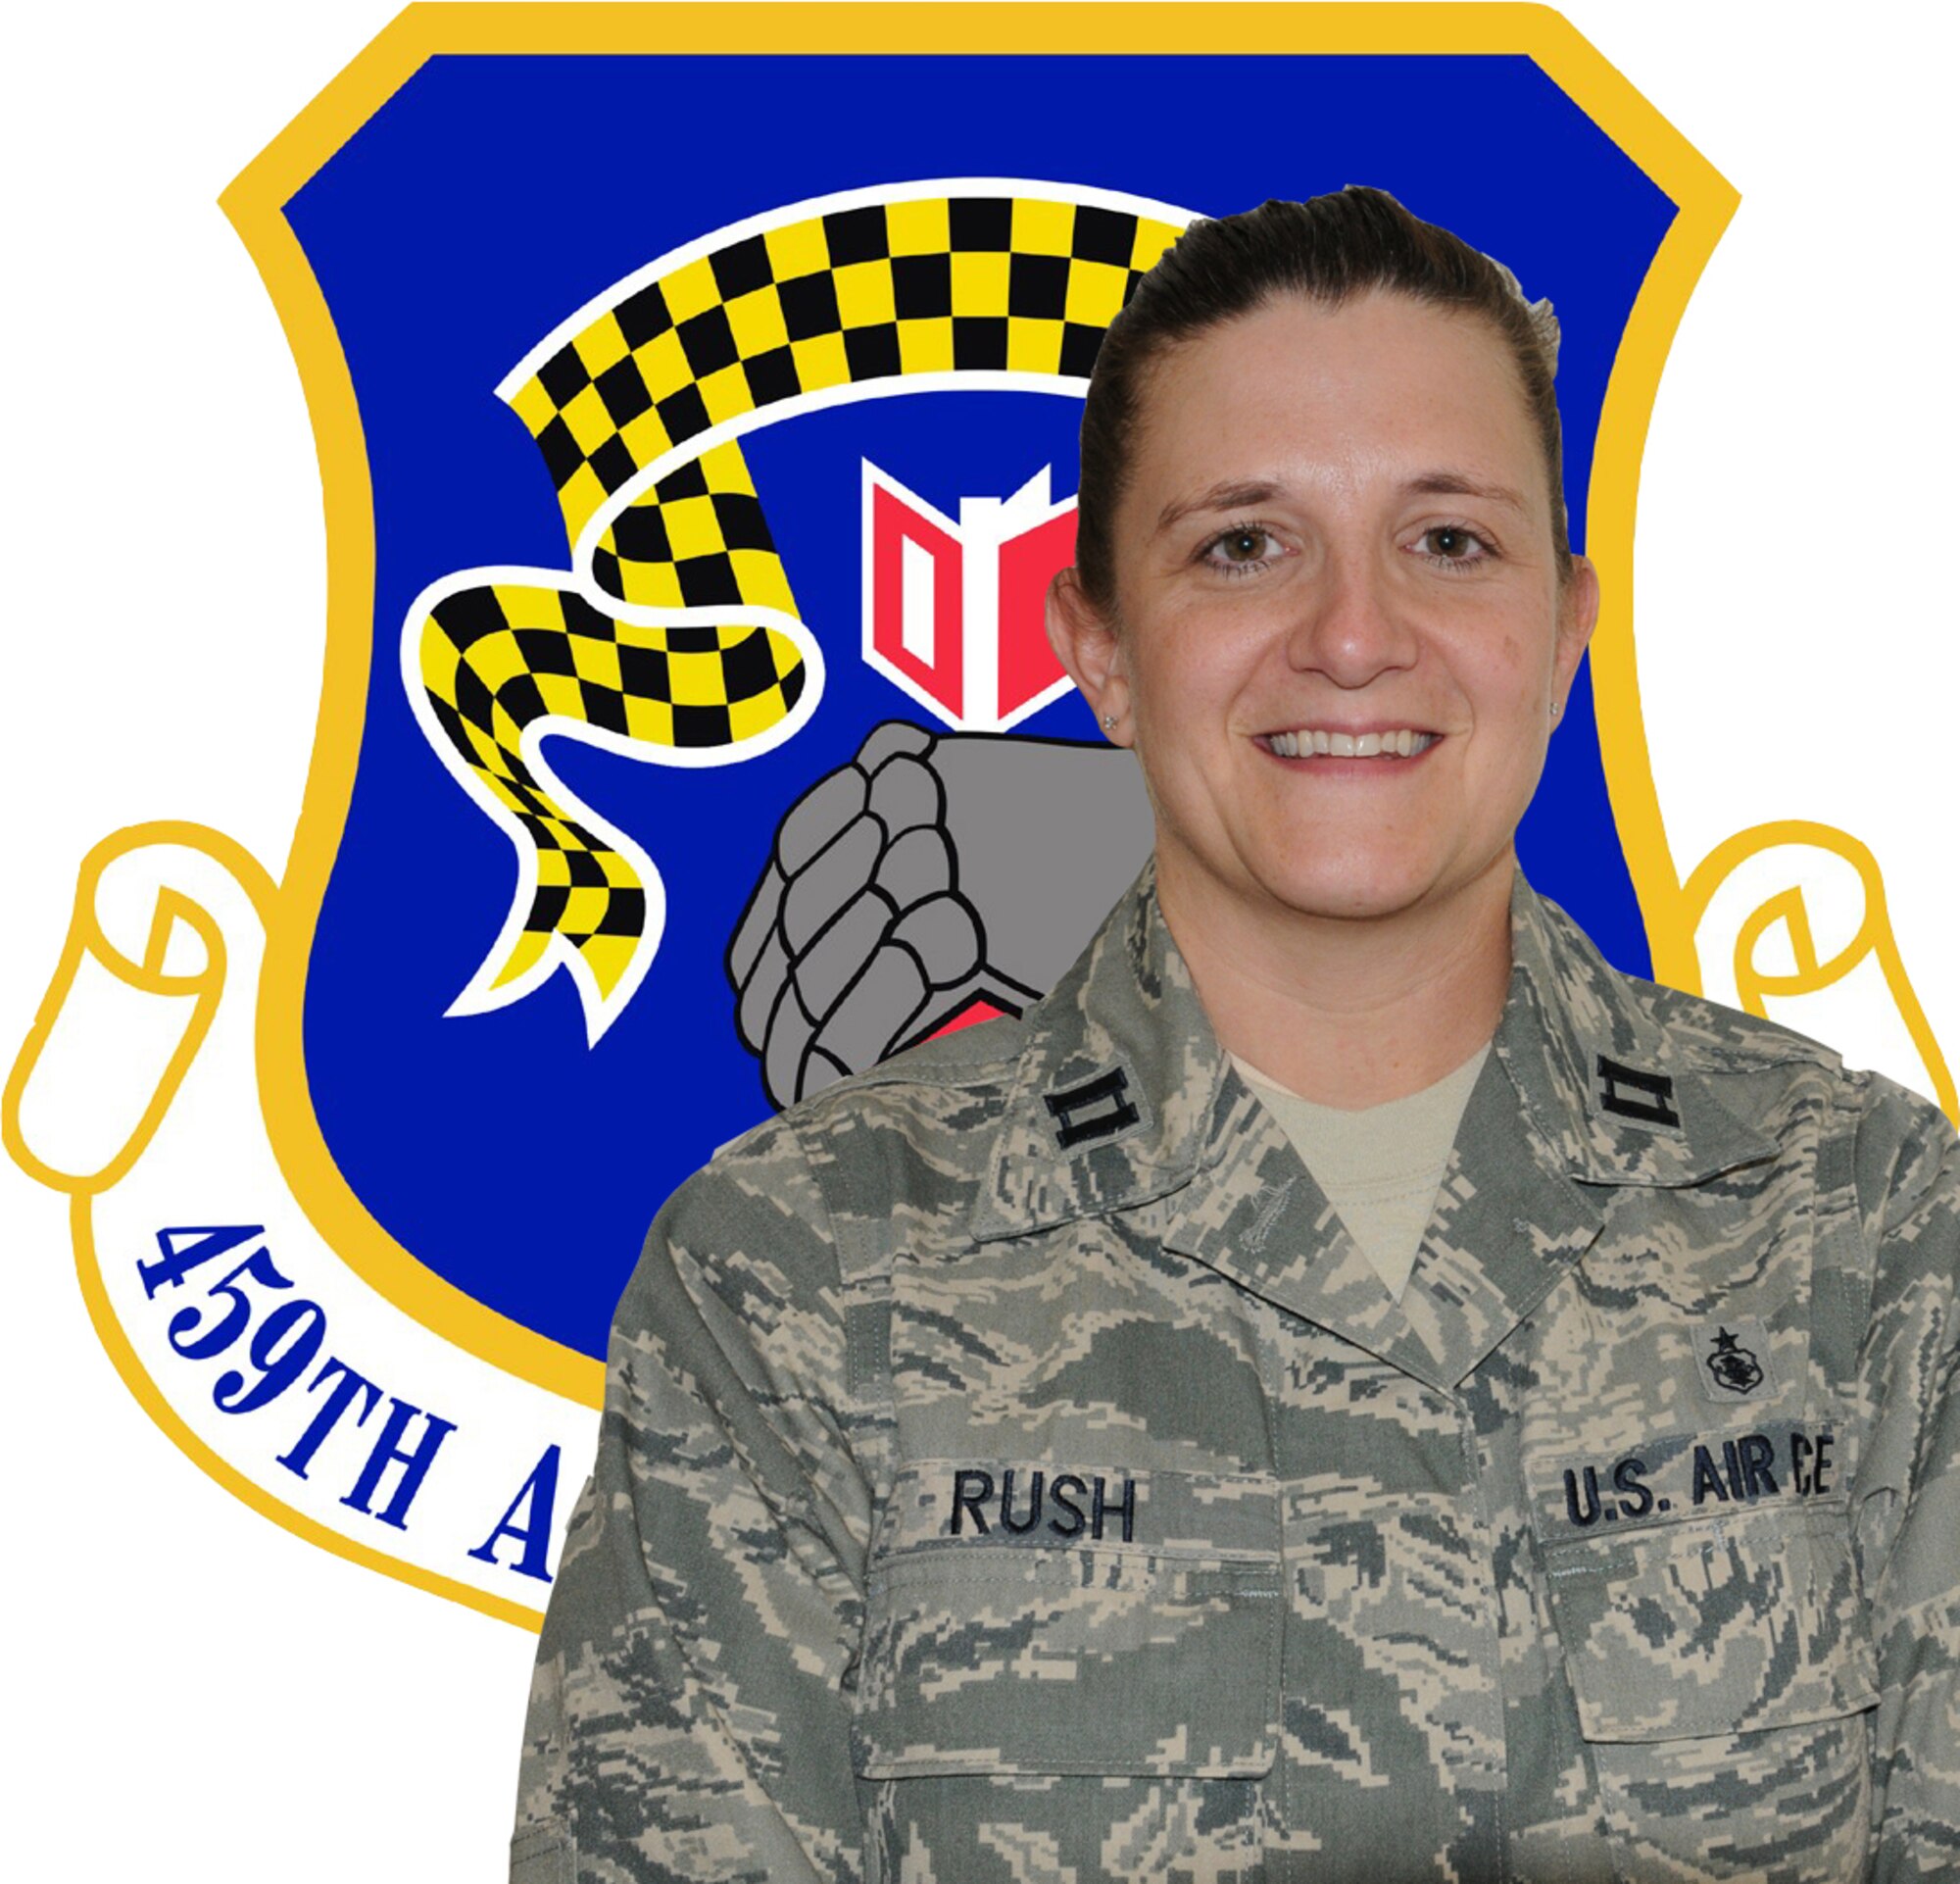 JOINT BASE ANDREWS, Md. -- Say hello to the 459th Air Refueling Wing's newest Airman, Capt. Tammy Rush. Captain Rush was recently assigned to the 459th Aeromedical Staging Squadron as a nurse. The Toledo, Ohio, native comes to the 459 ARW after serving as a Traditional Reservist for the 403rd ASTS at Keesler Air Force Base, Miss. In her spare time, Captain Rush enjoys outdoor activities and hanging out with family. (U.S. Air Force photo illustration/Tech. Sgt. Steve Lewis)